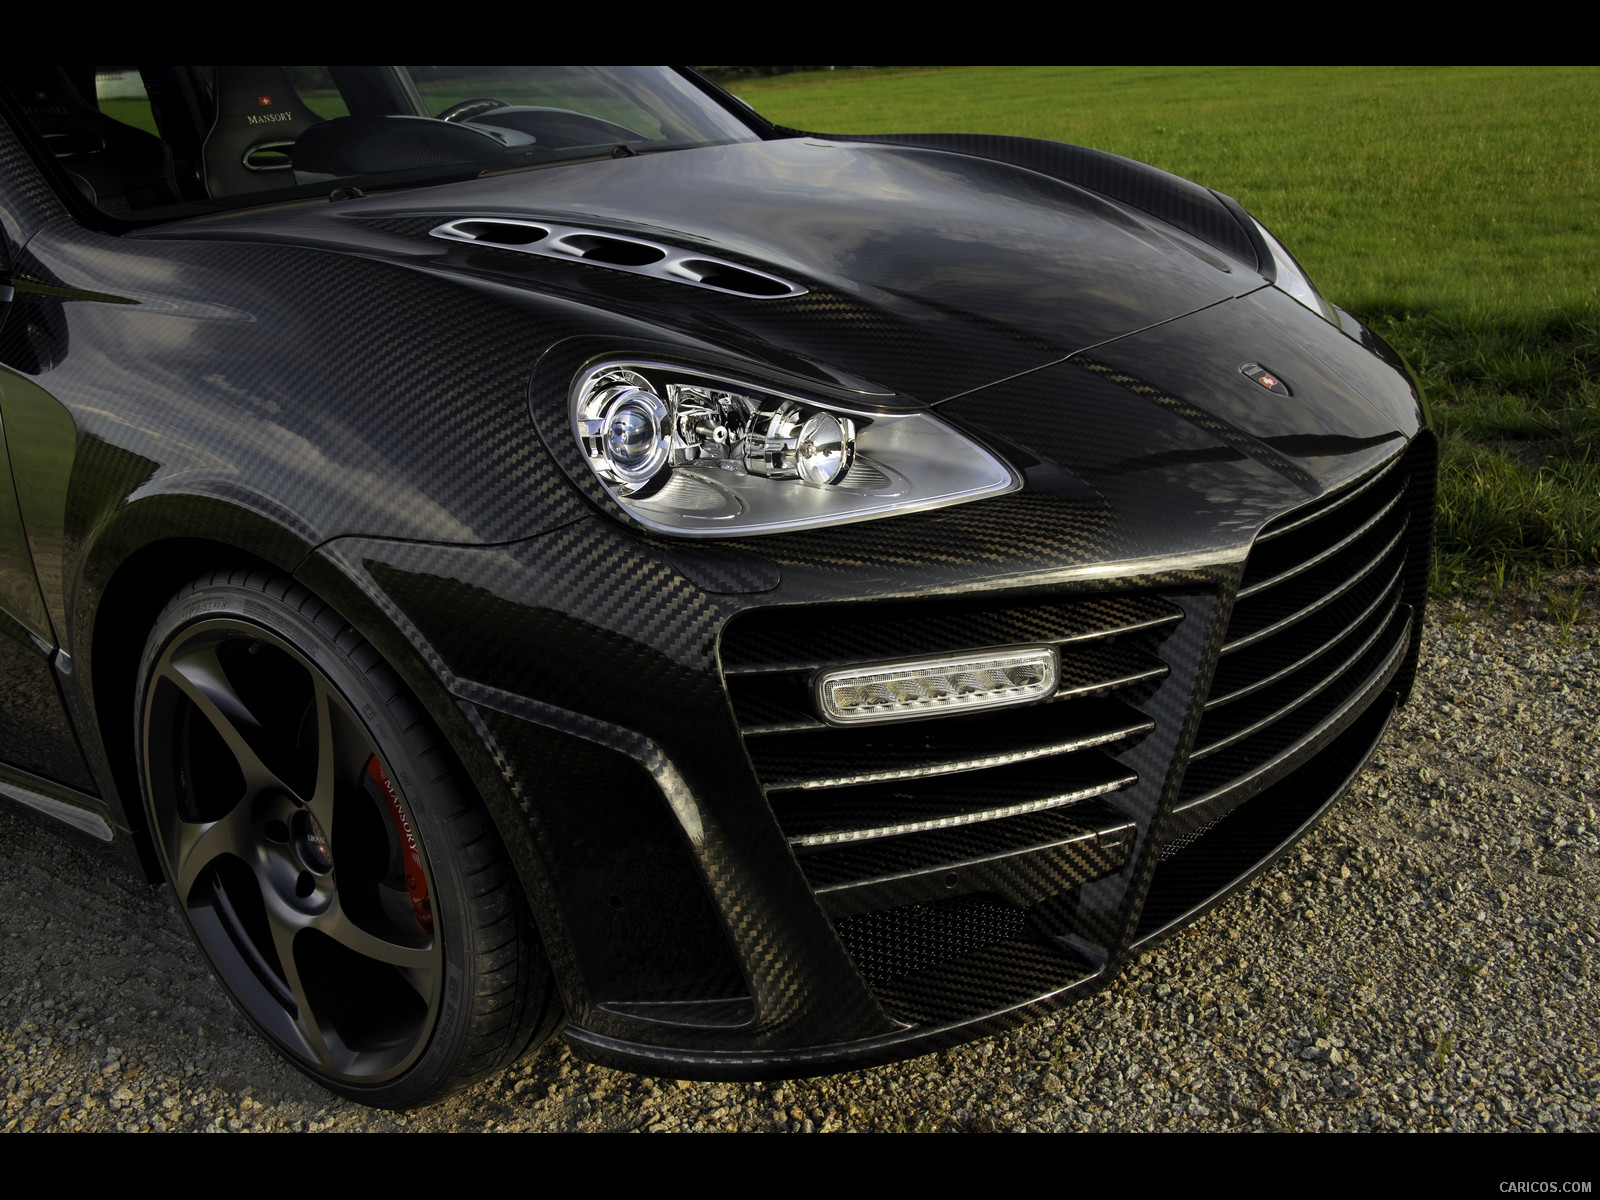 2009 Mansory Chopster based on Porsche Cayenne Turbo S  - Front, #16 of 38